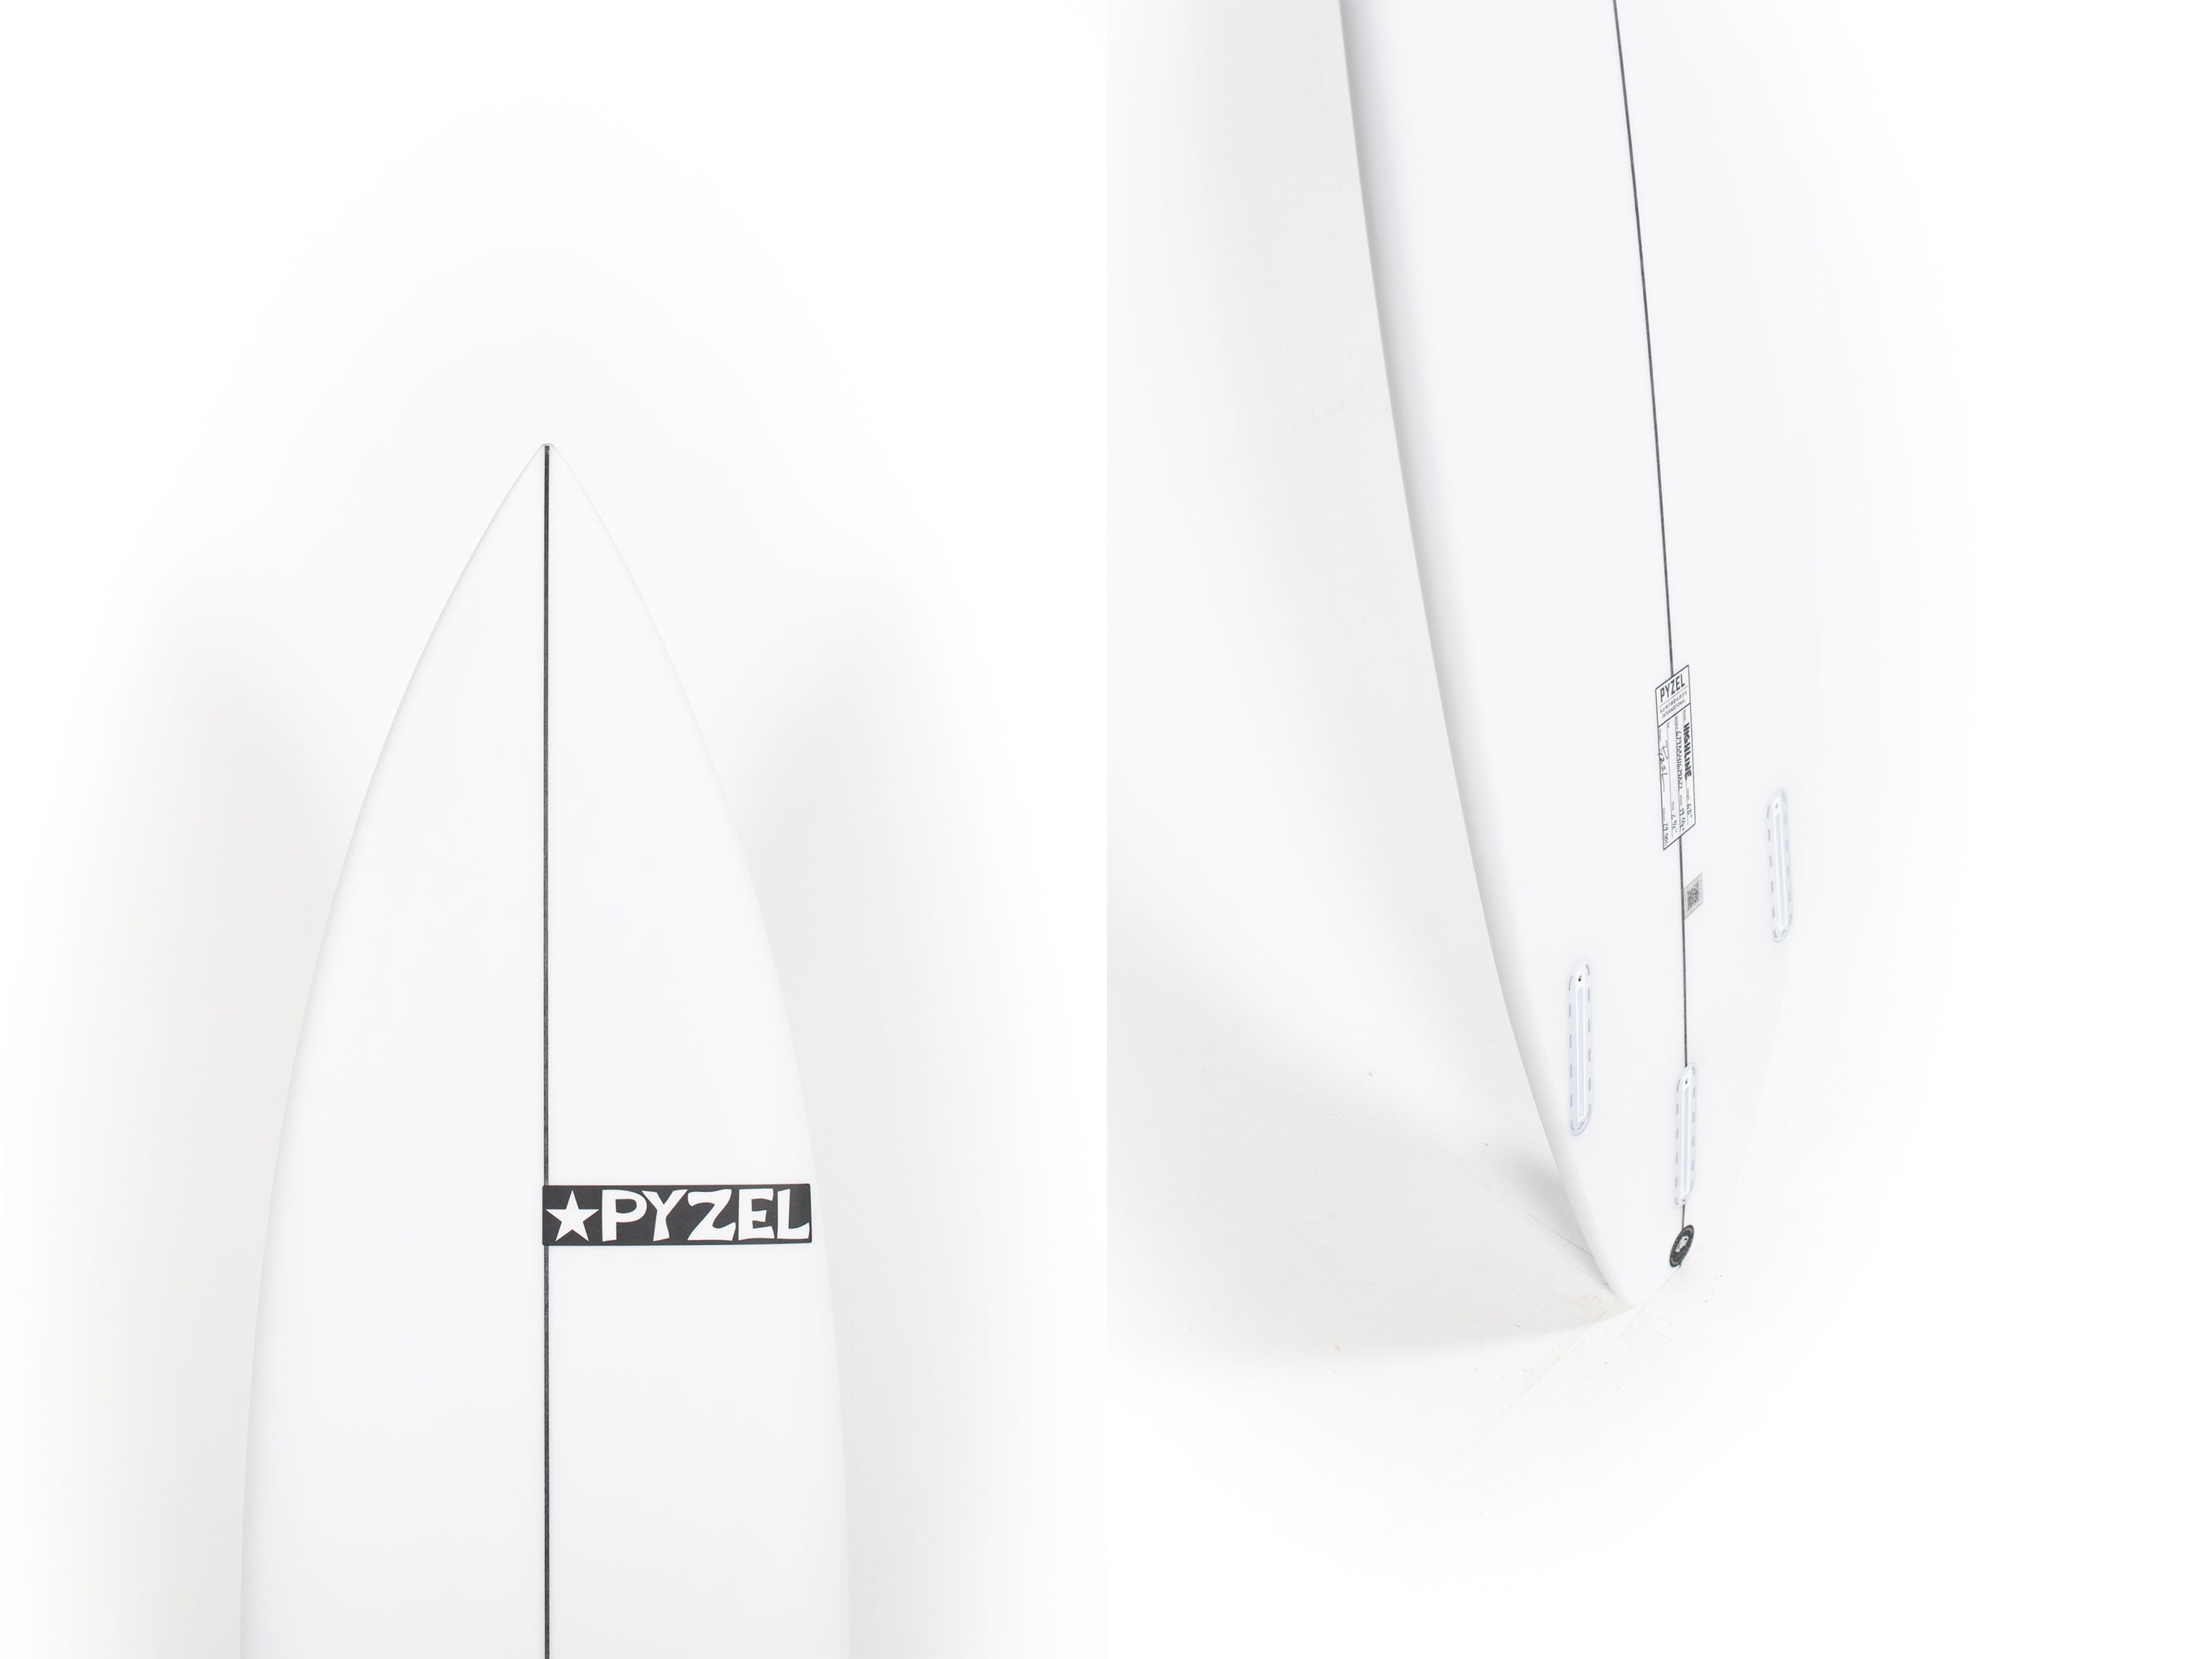 Pyzel Surfboards - HIGH LINE - 6'0" x 19 1/4 x 2 1/2 x 29,50L - Ref: 679322